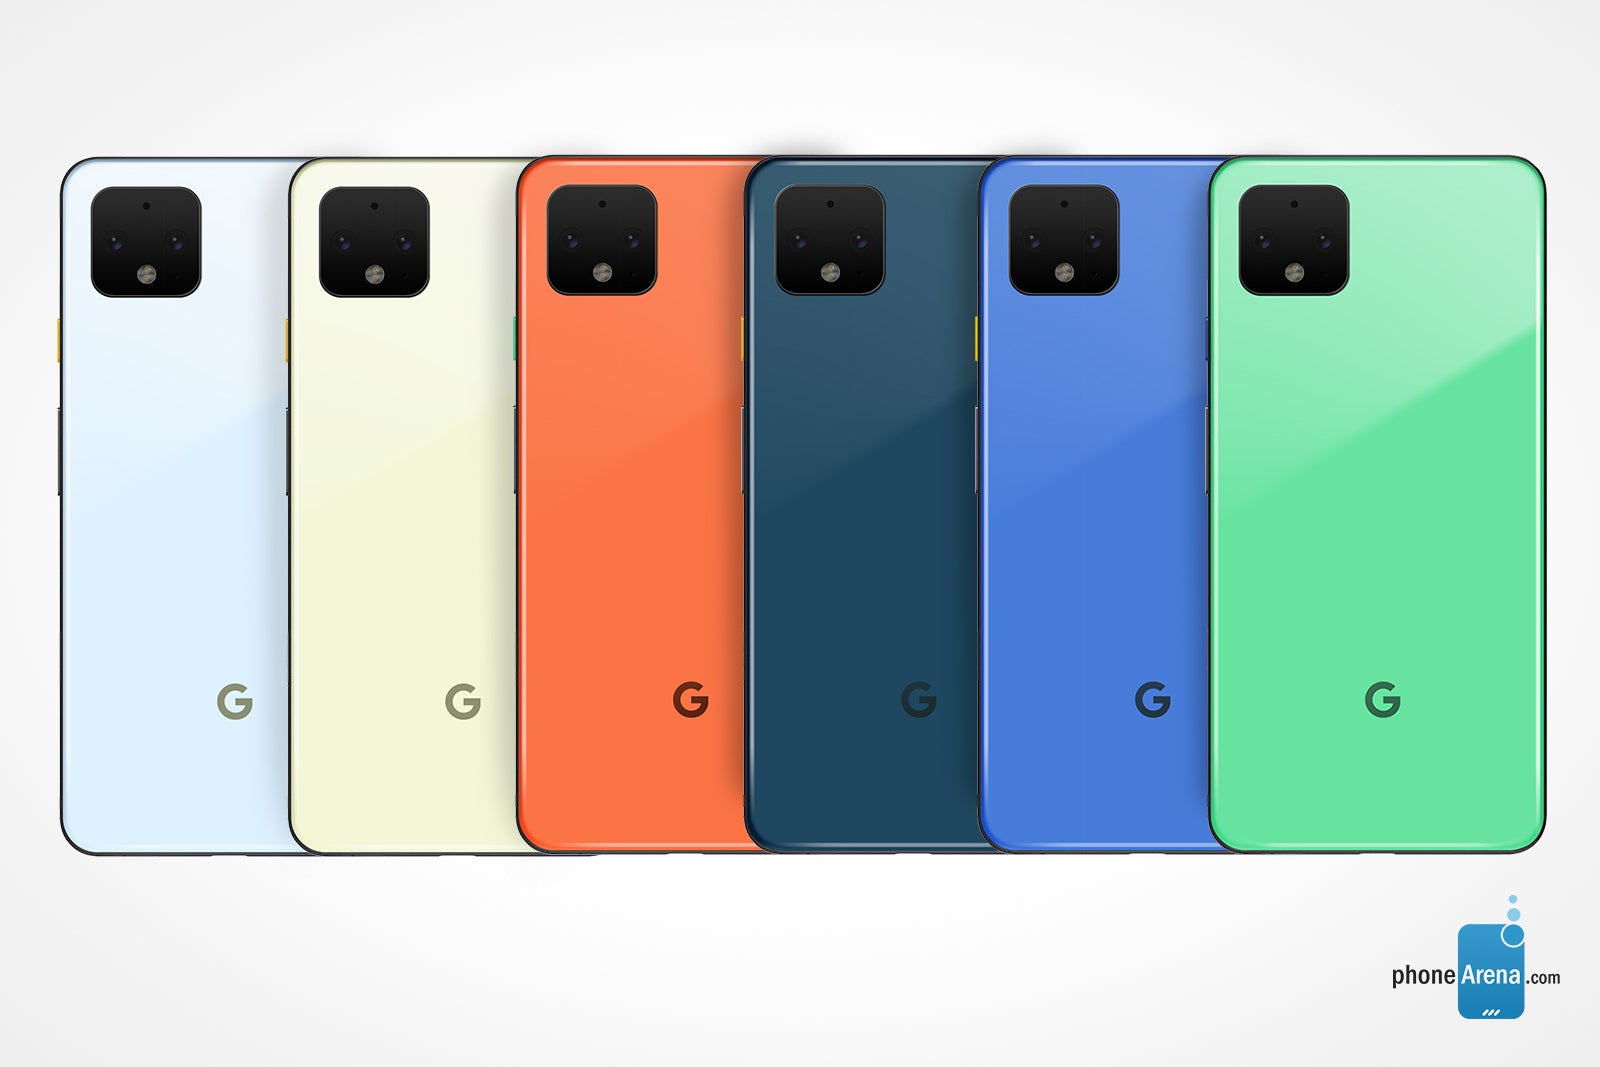 Google Pixel 4 design concepts in Androdid Green, Blue, Navy Blue, Orange, Chartreuse, and Pattens Blue - New Pixel 4 color options based on Android 10's refreshed palette envisioned in concept renders